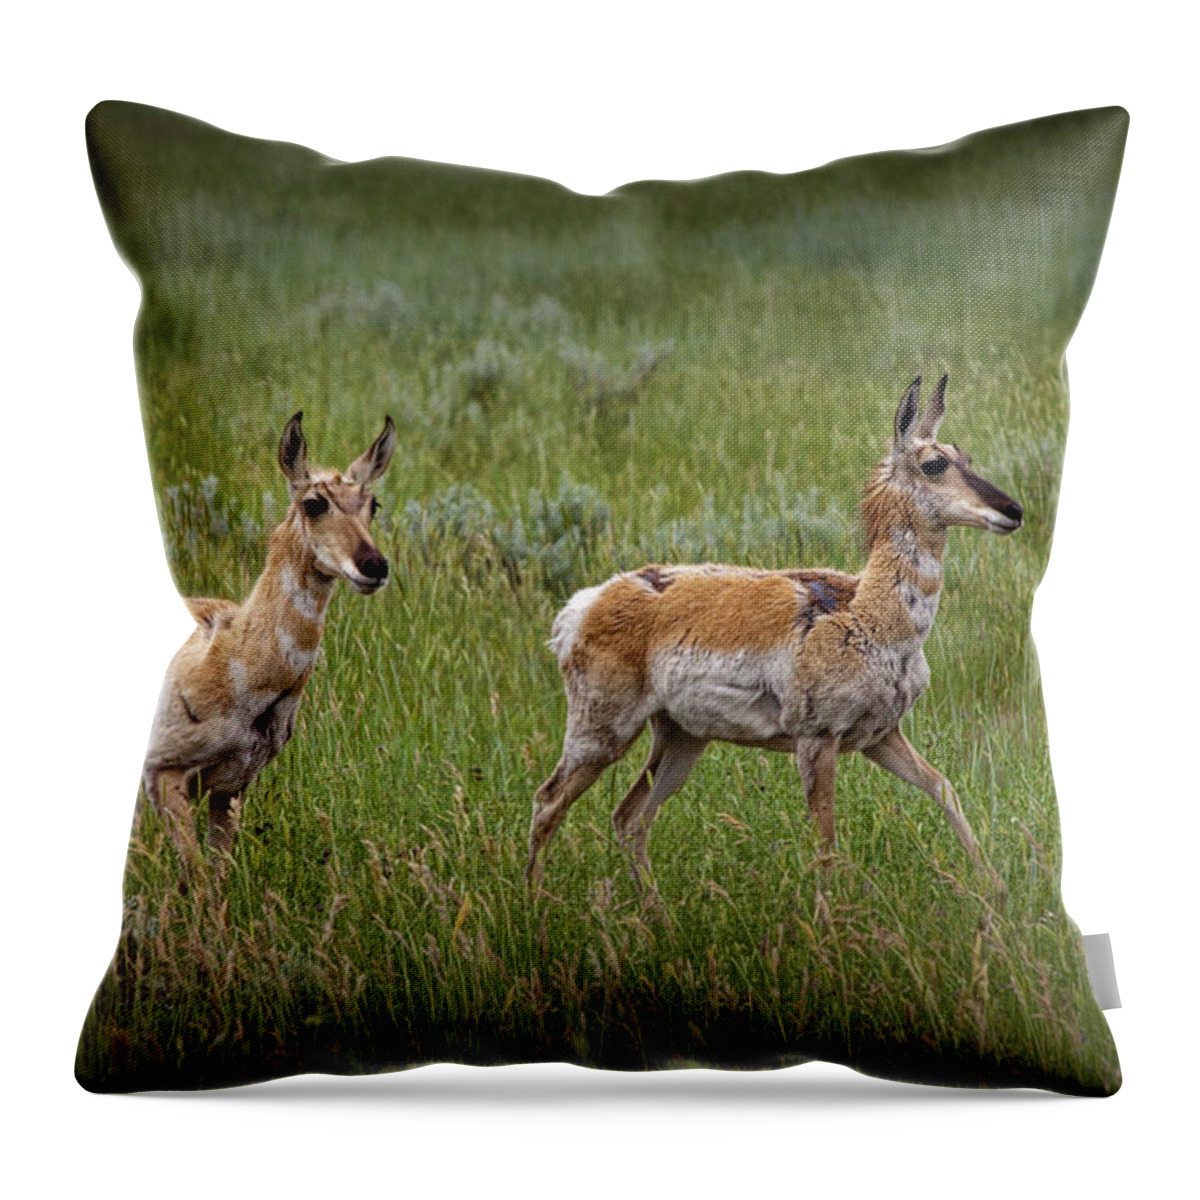 Antelope Throw Pillow featuring the photograph Two Young Pronghorn Antelopes No. 1129 by Randall Nyhof